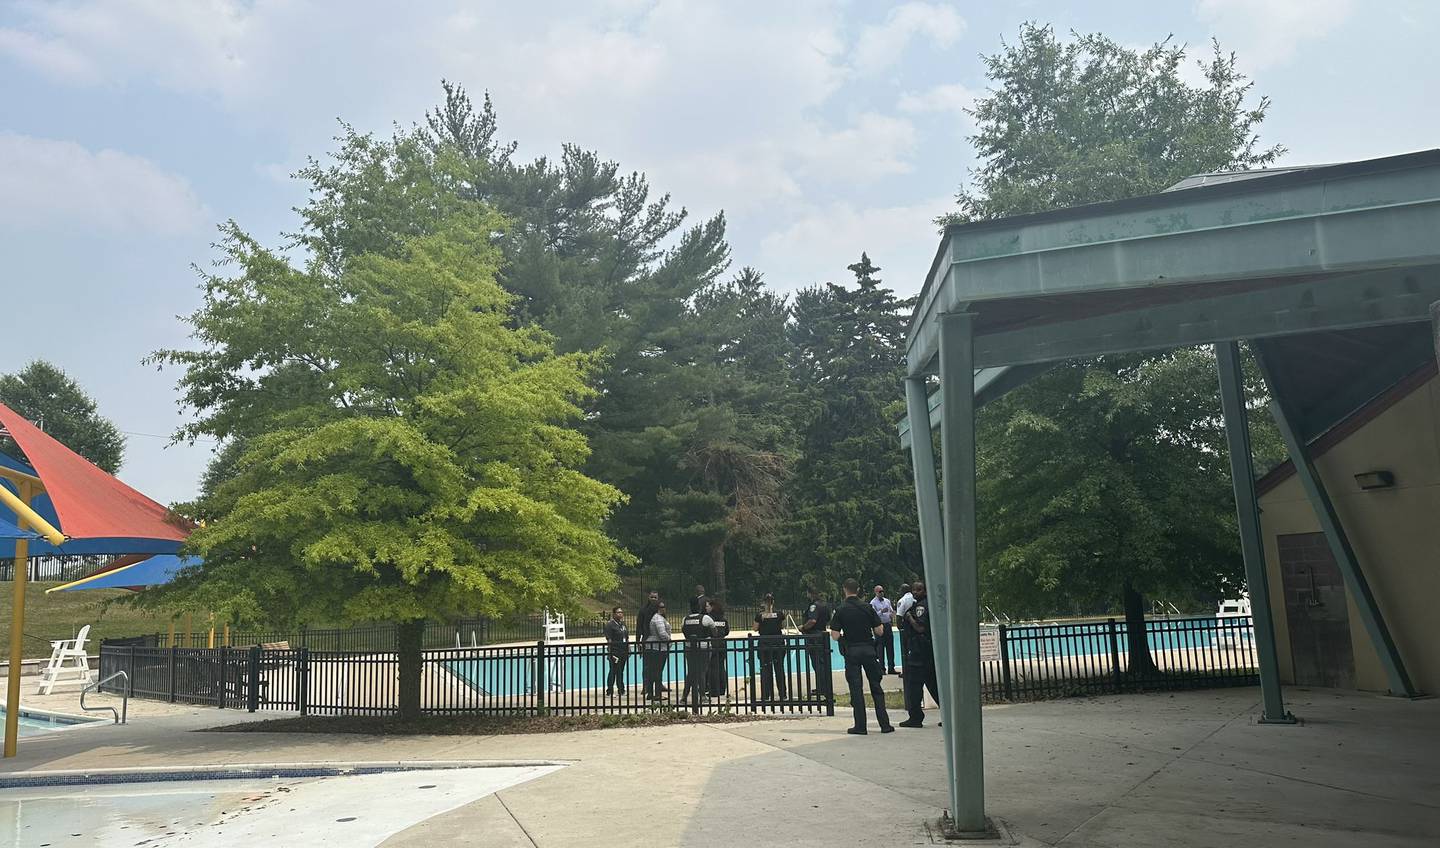 Police officers on scene at the Roosevelt Park Pool on the afternoon of June 7.